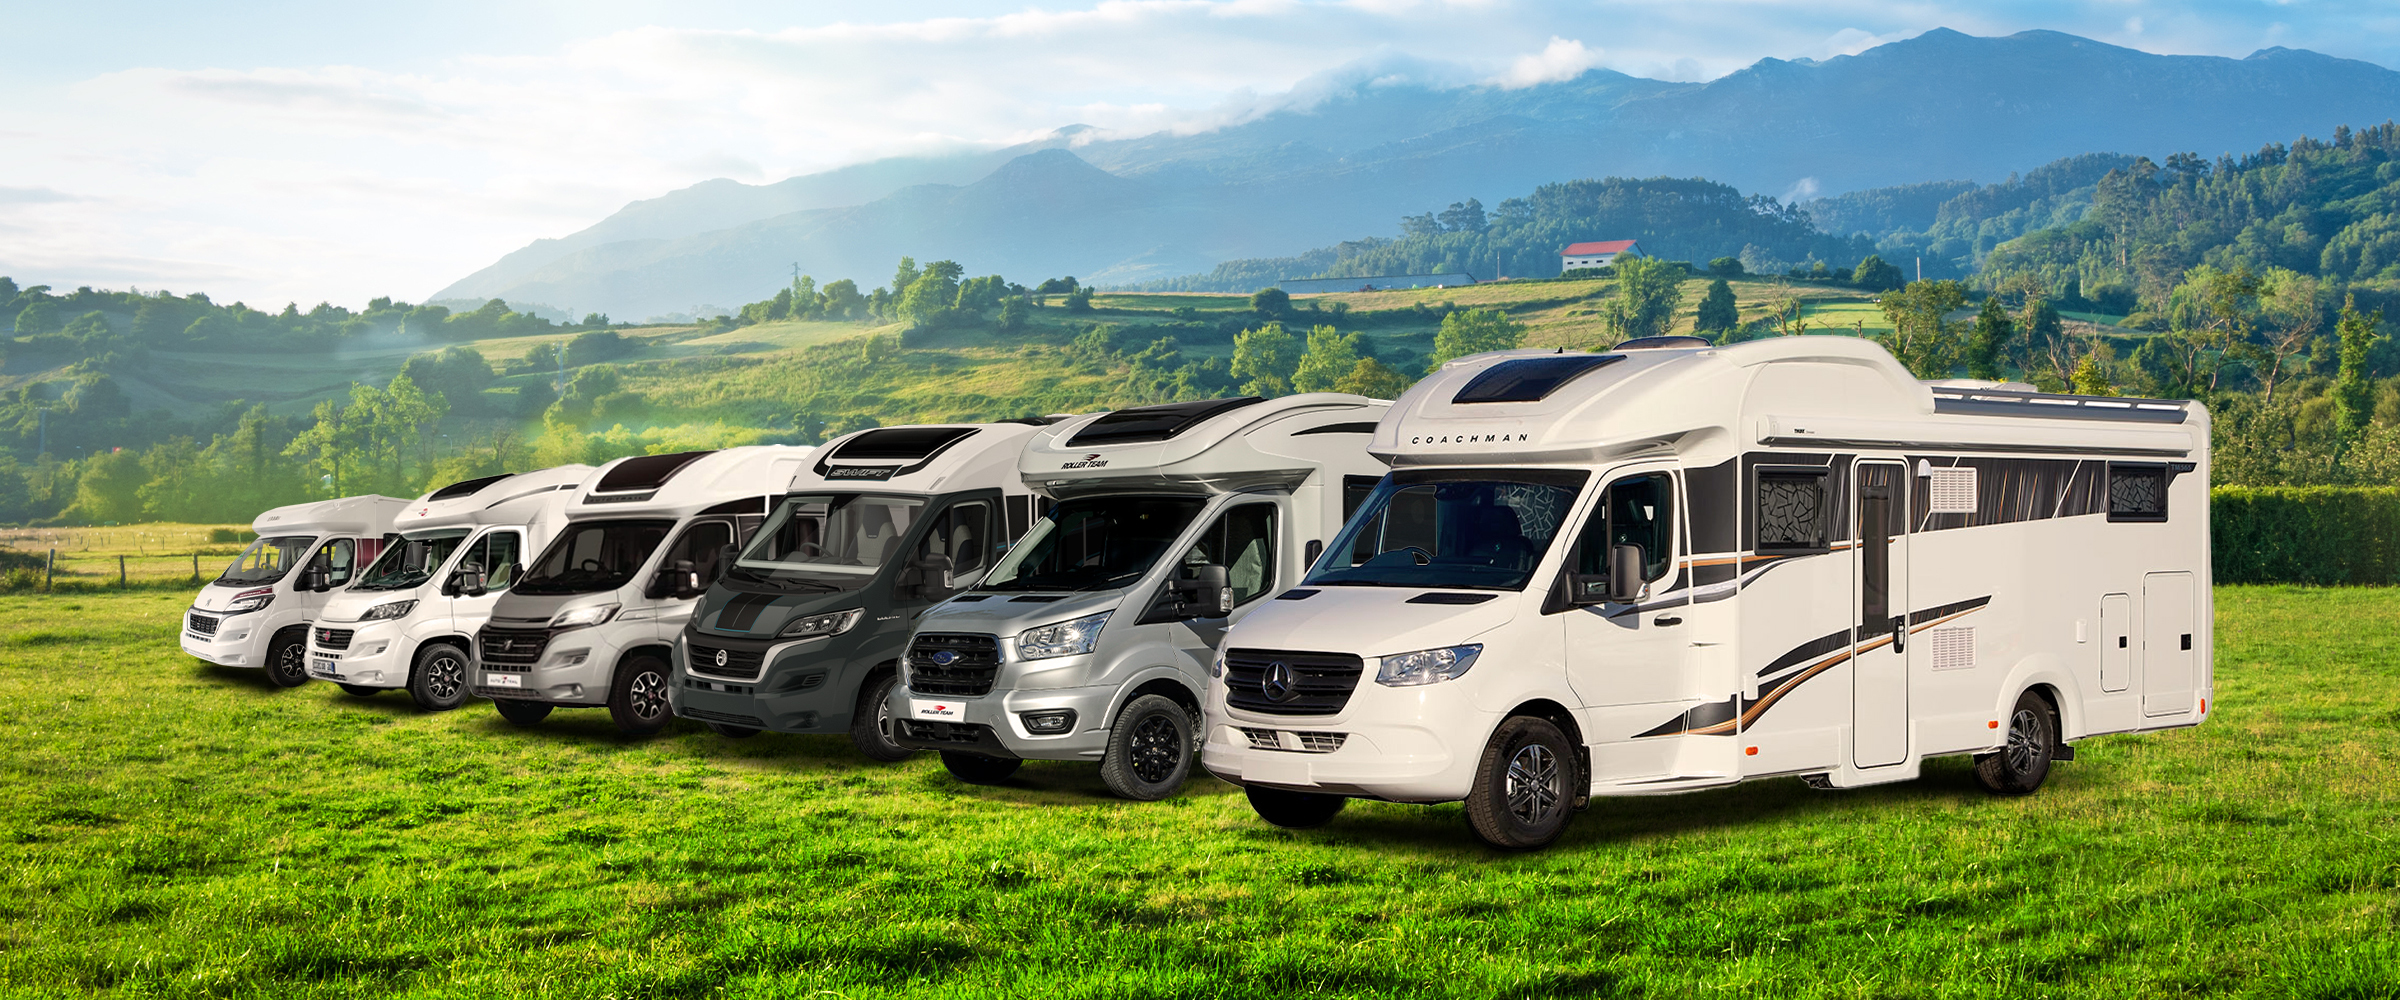 New Motorhomes for Sale | Leisure World Group